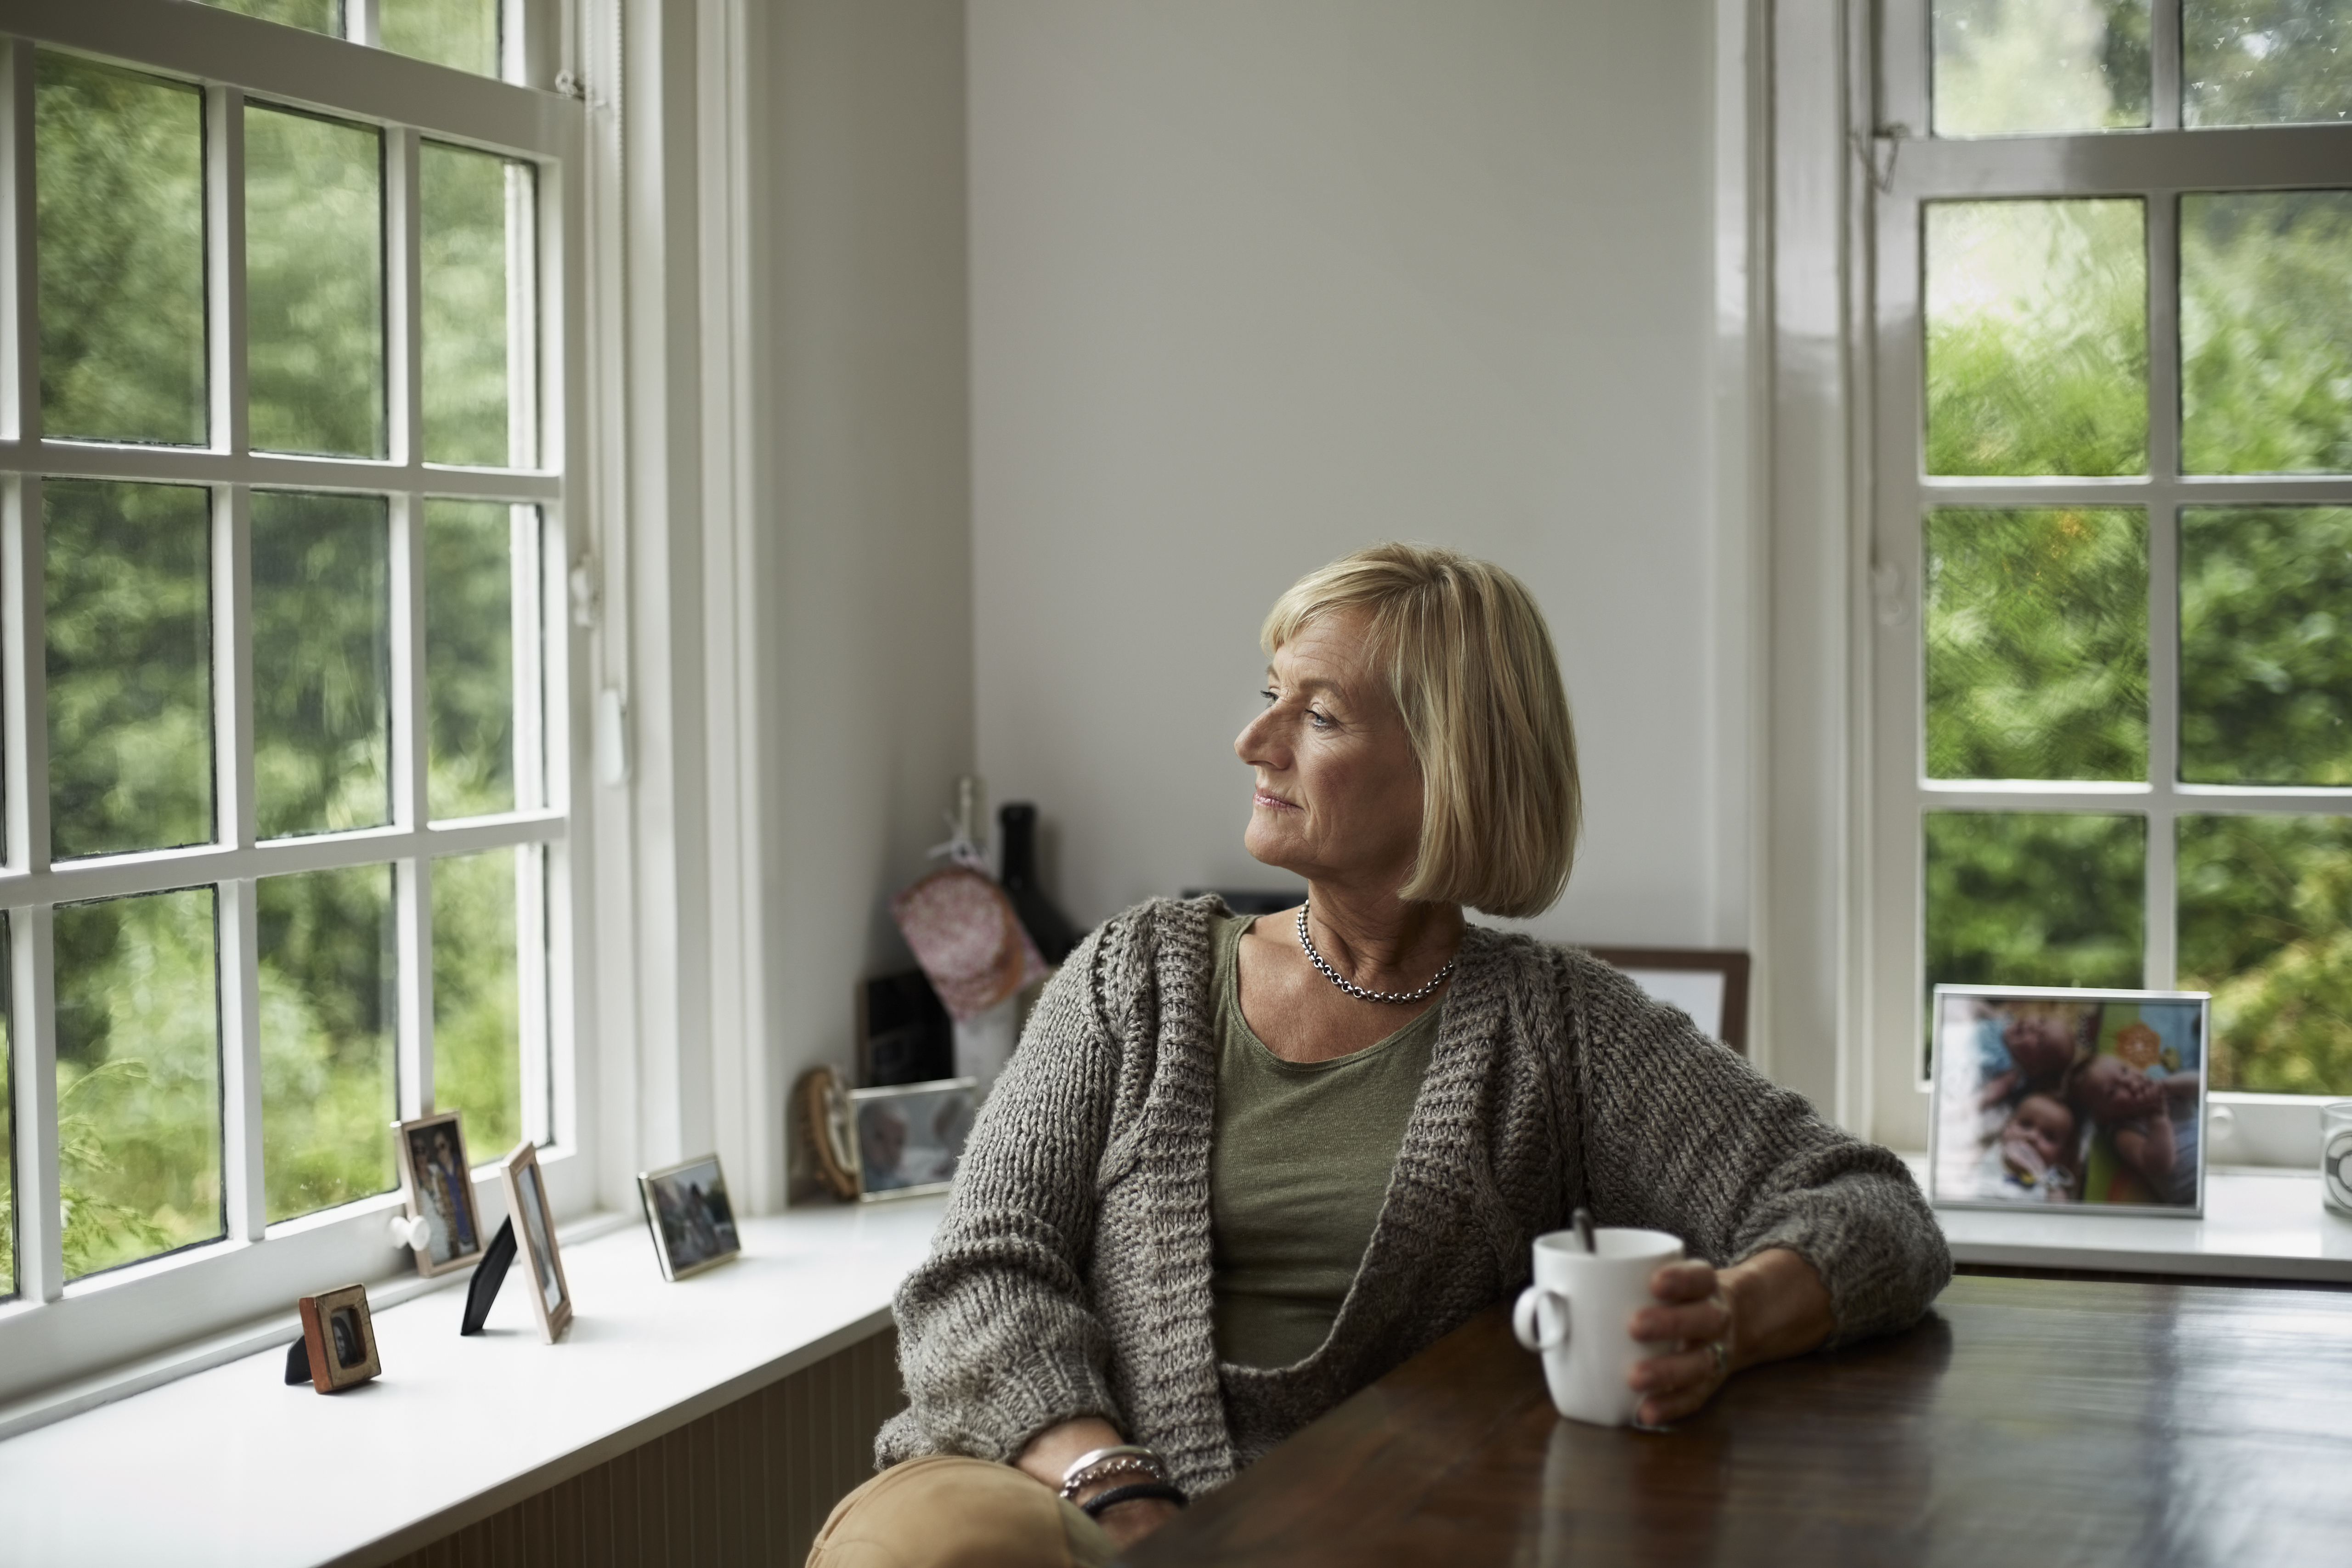 Thoughtful senior woman having coffee | Source: Getty Images